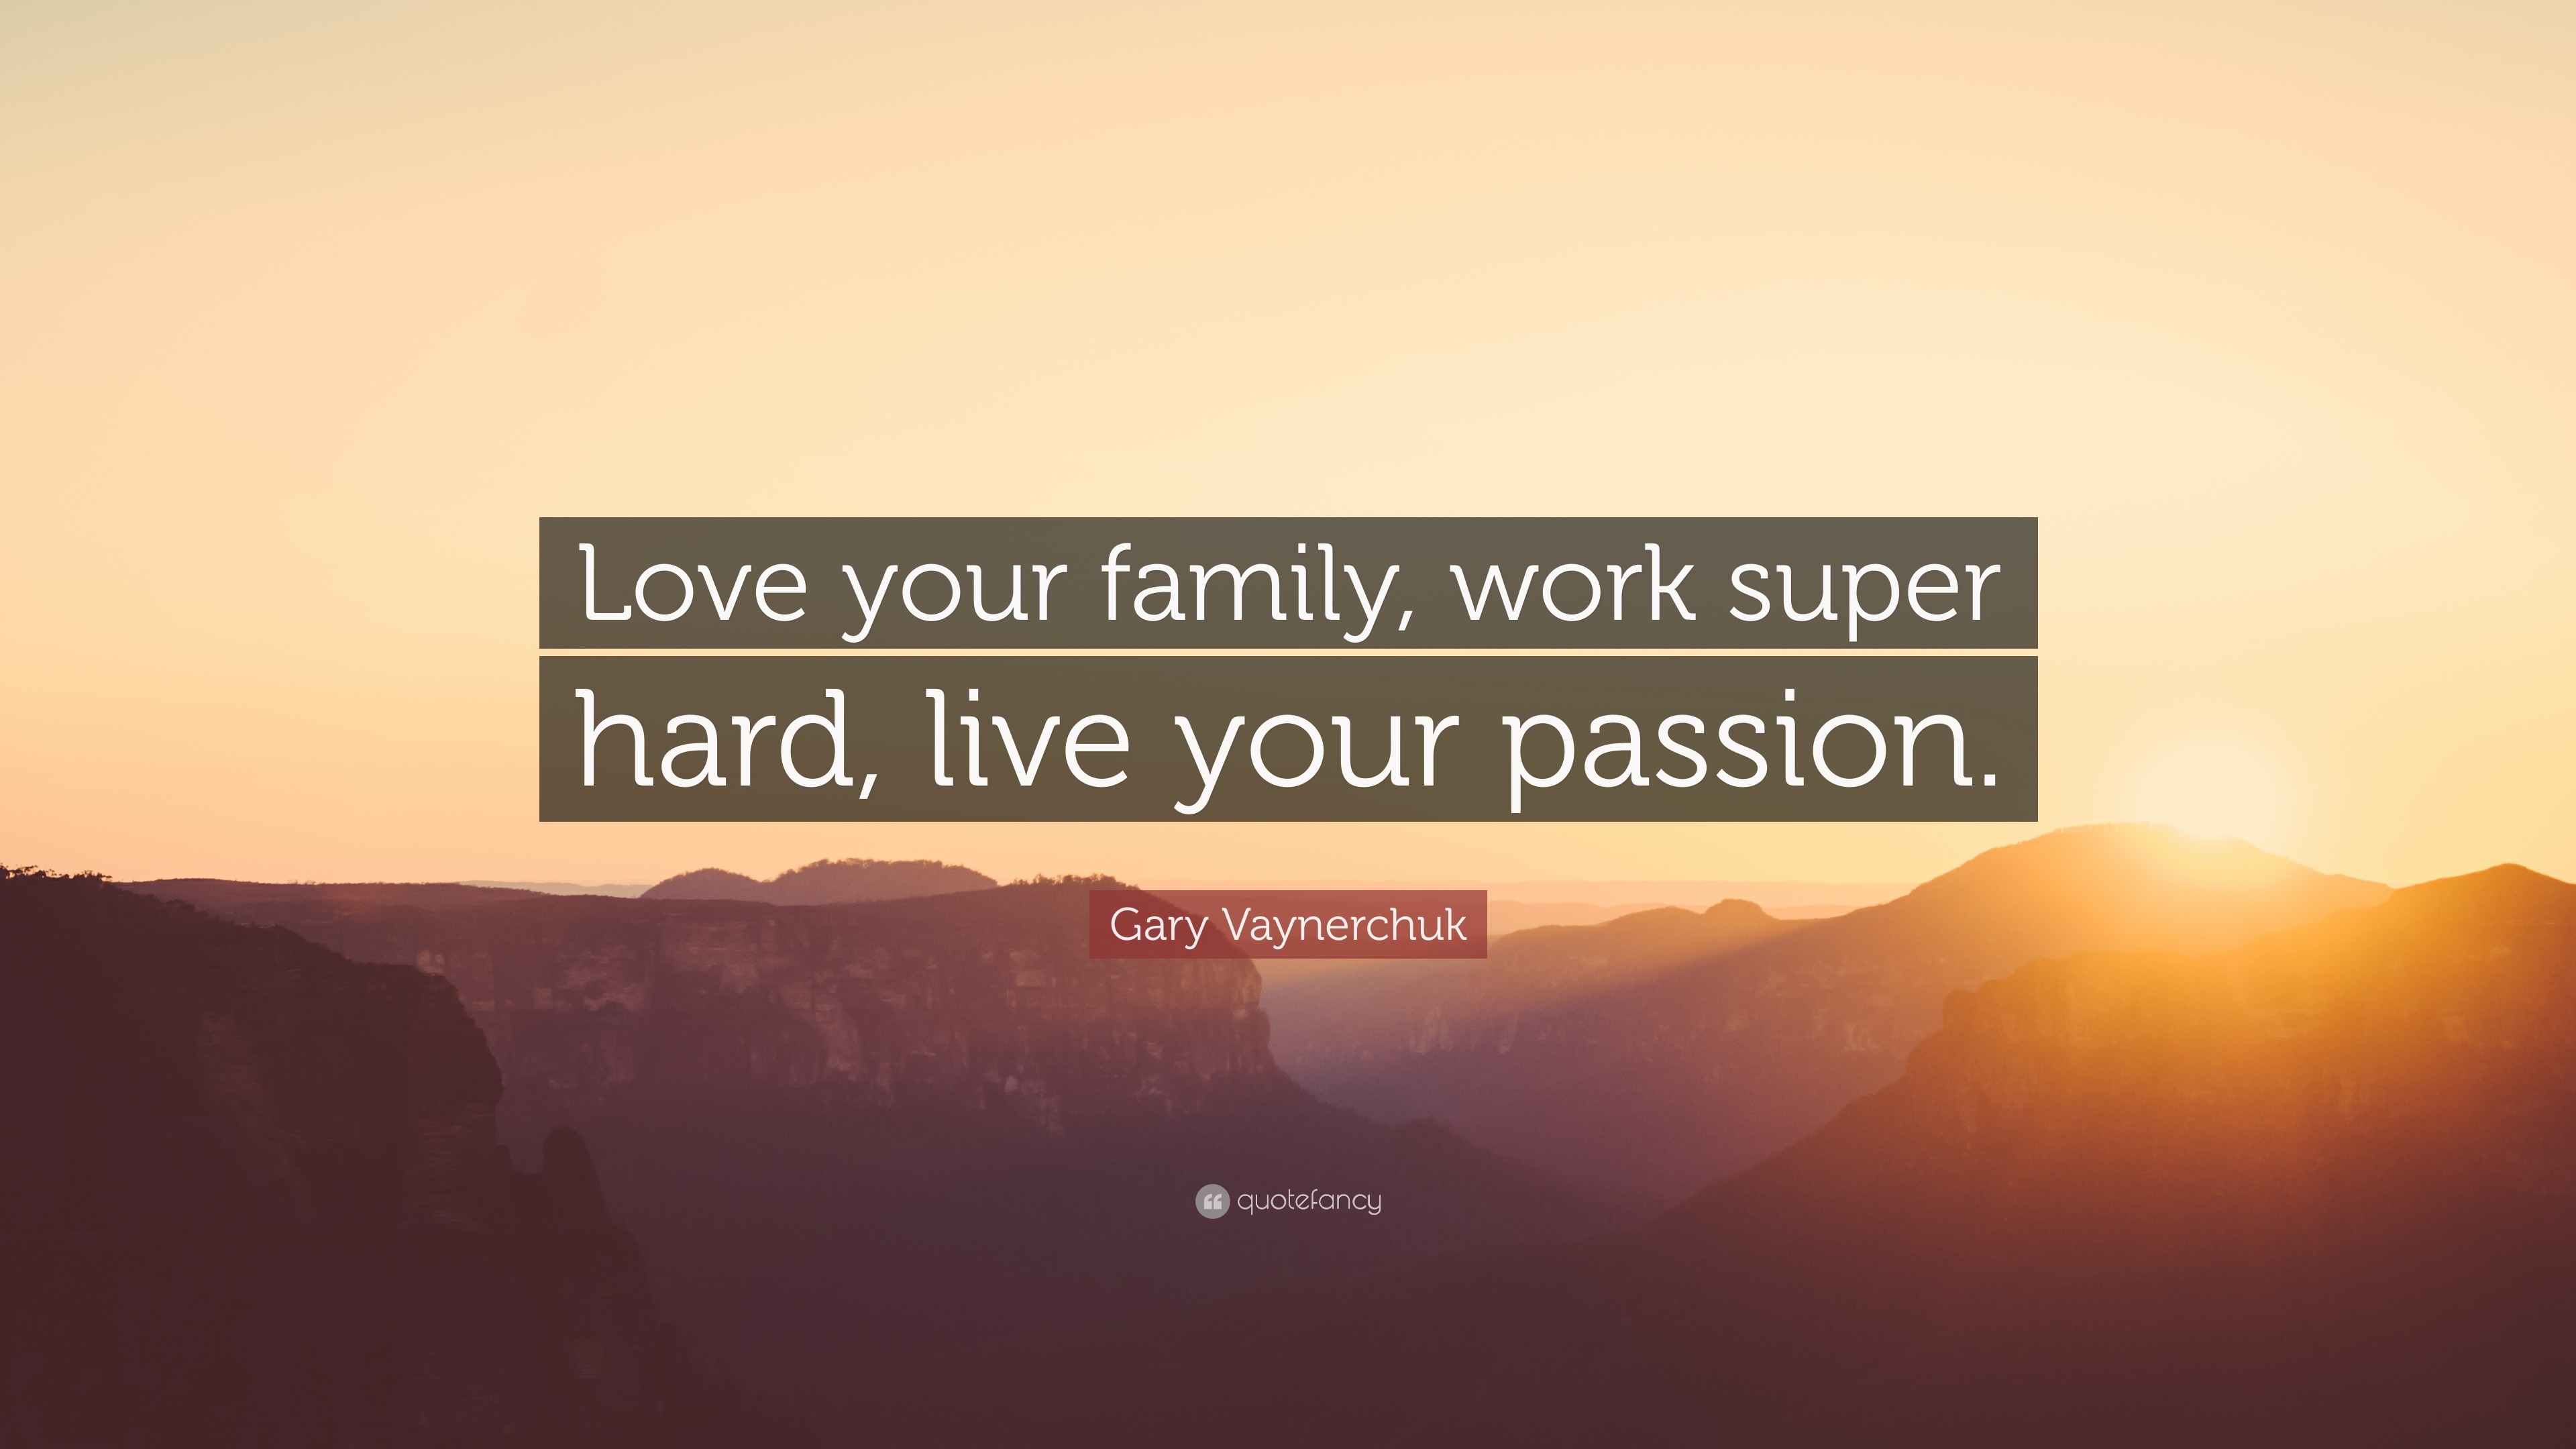 3840x2160 Love You Quotes: “Love your family, work super hard, live your passion